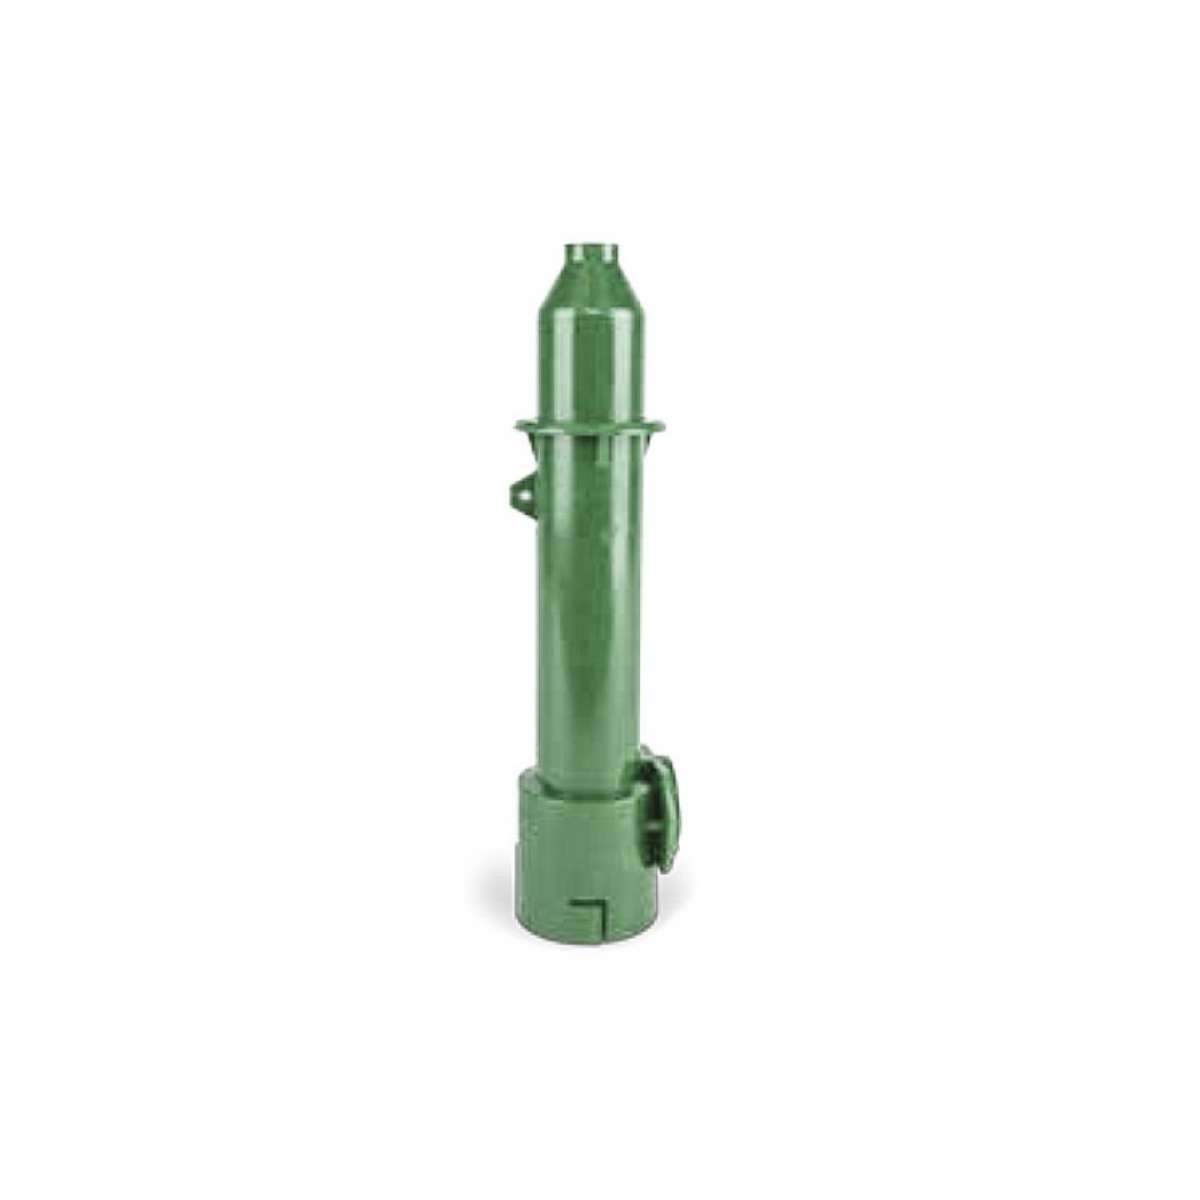 IsoLink 8" Rigid Spout with 1/2" Tip - Dark Green